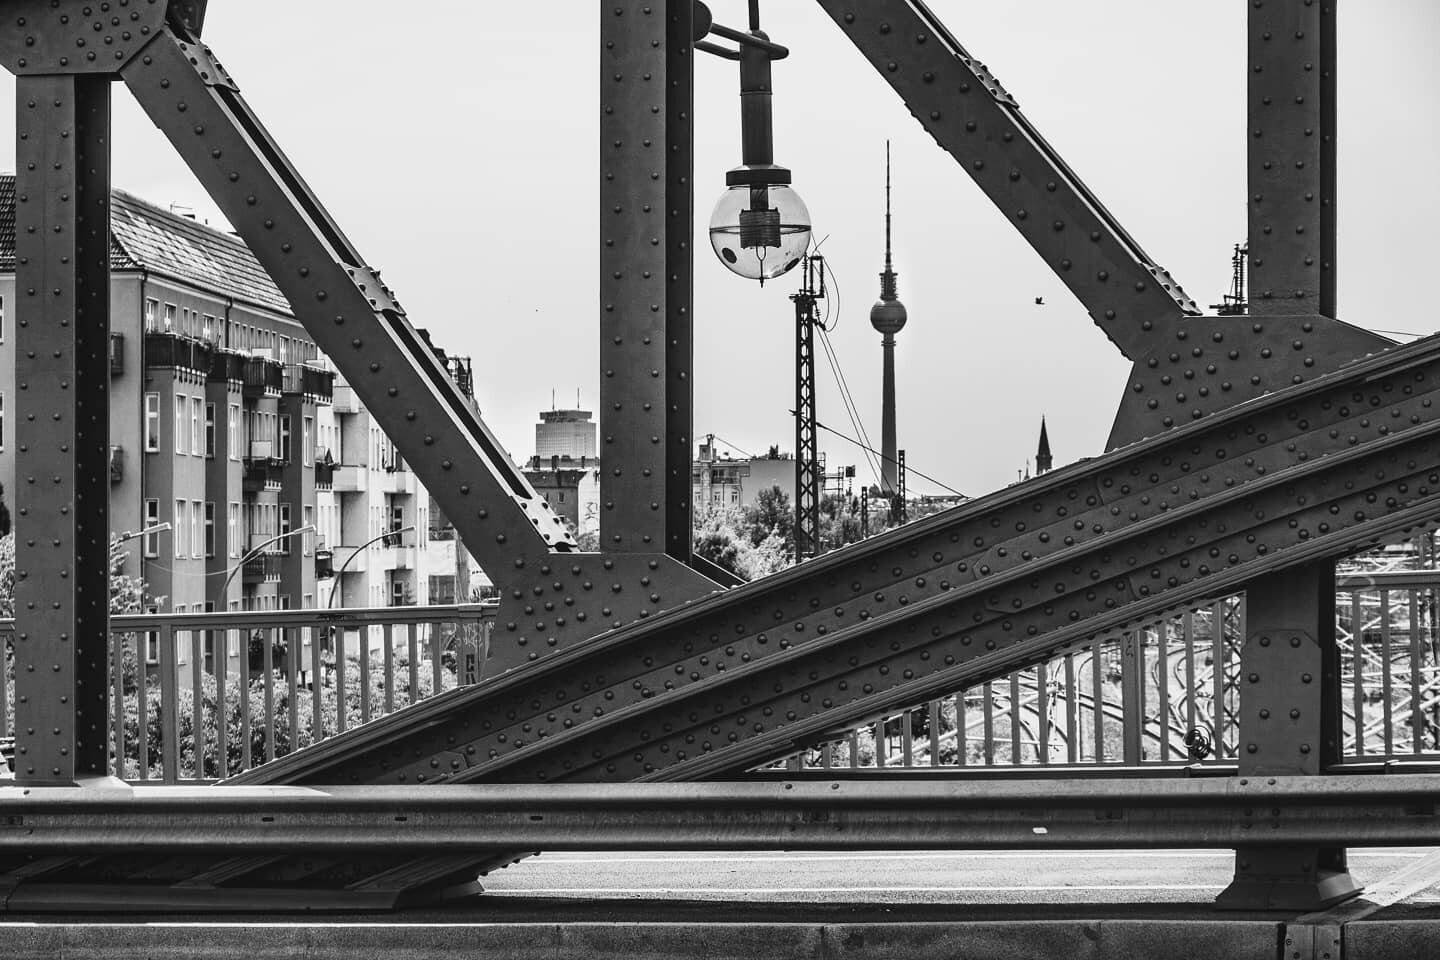 BERLIN, B&ouml;sebr&uuml;cke
#cityscape &amp; #technics 
______________
☆ The station #Bornholmer #Strasse exists since 1935. Its steel arch is 138 metres long and 27 metres wide. The construction of the first nickel-steel bridge in Berlin started in